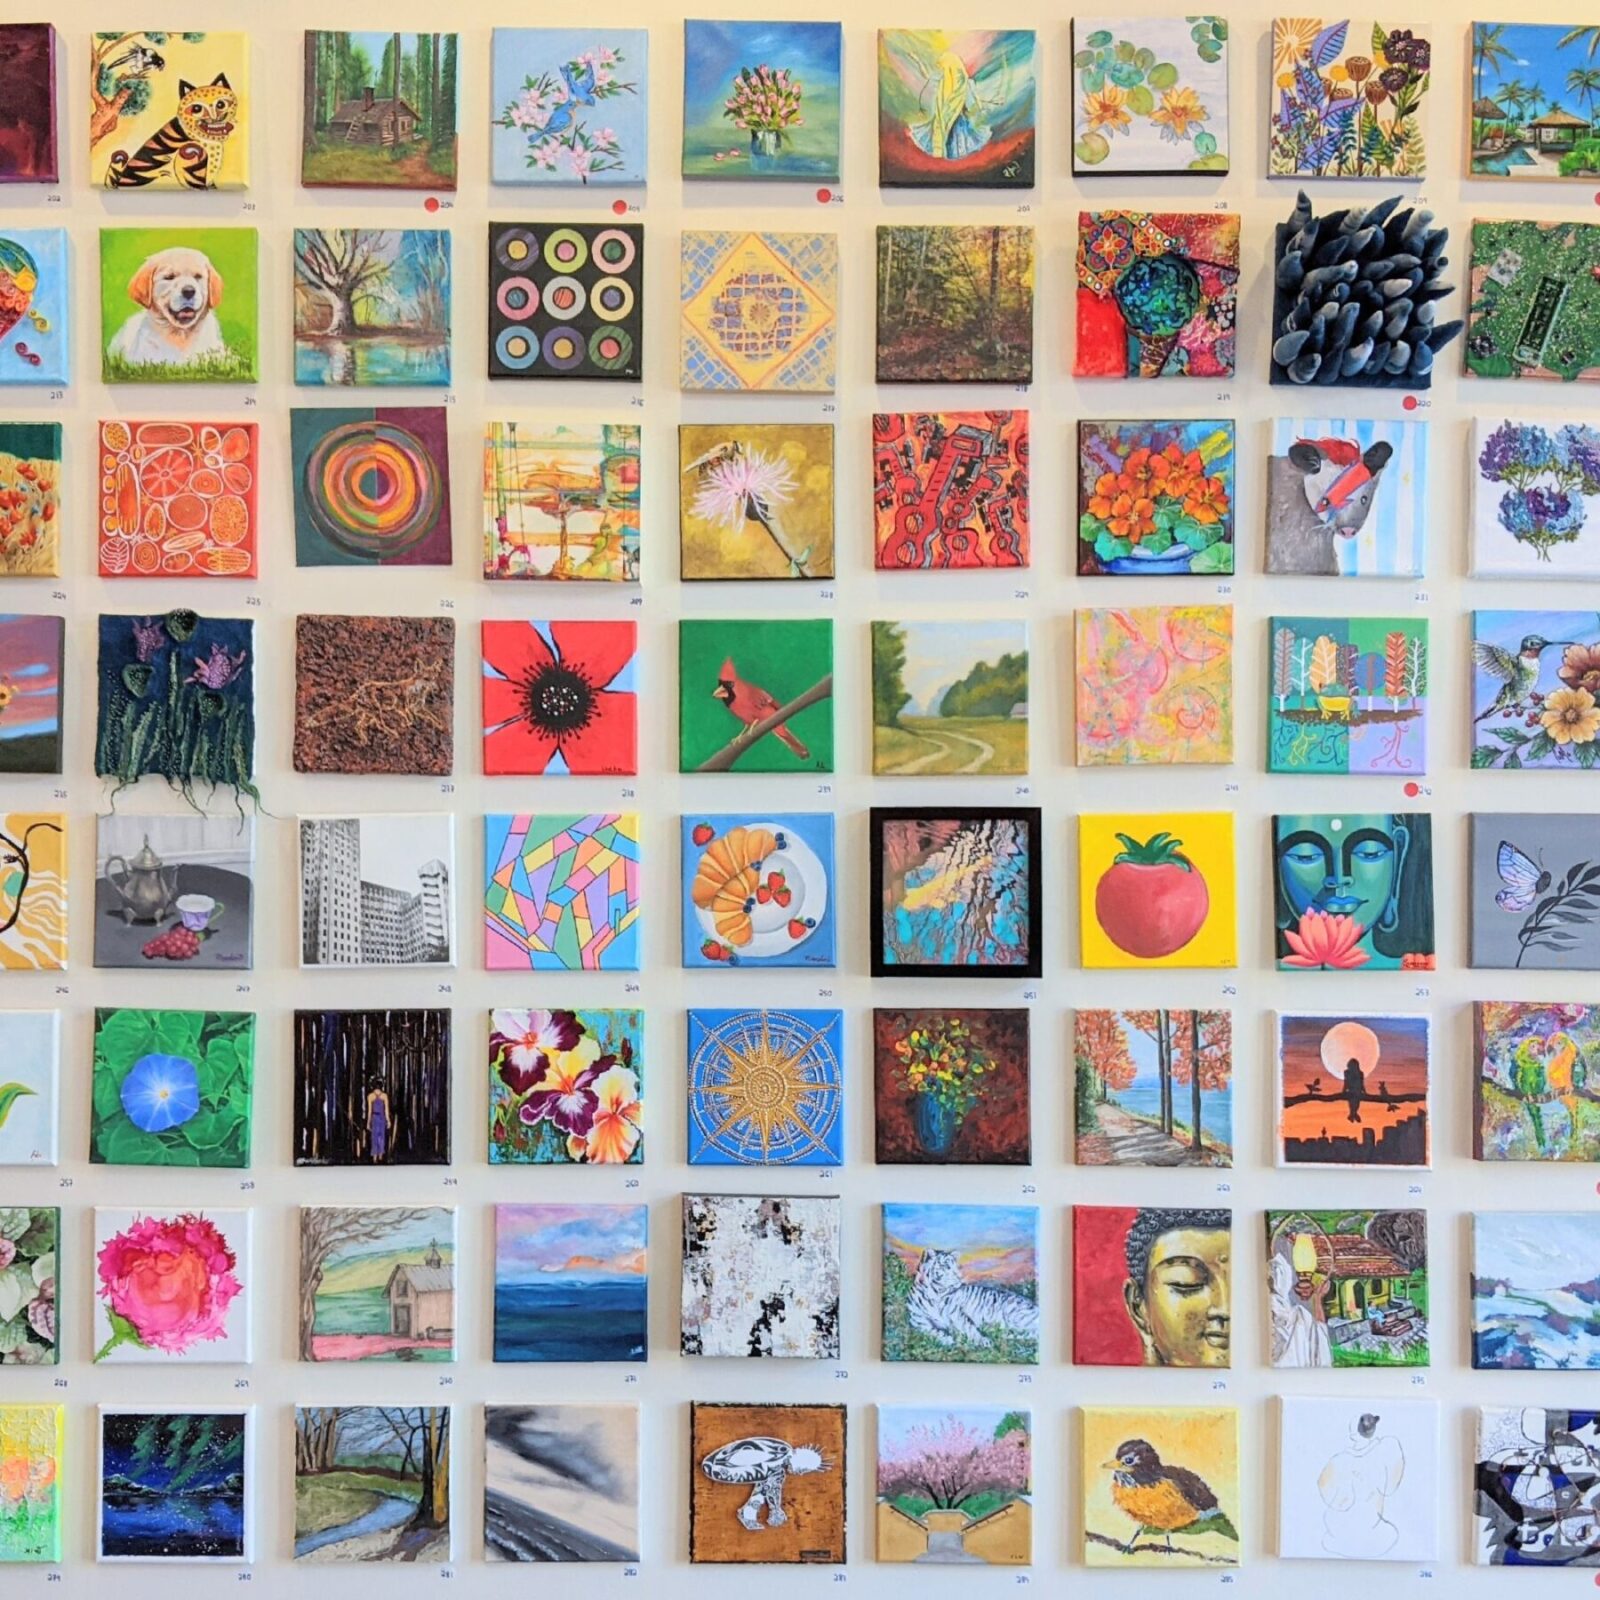 Photo of 8 x 8 pieces of art, part of our GR8 Works art show, open call to artists